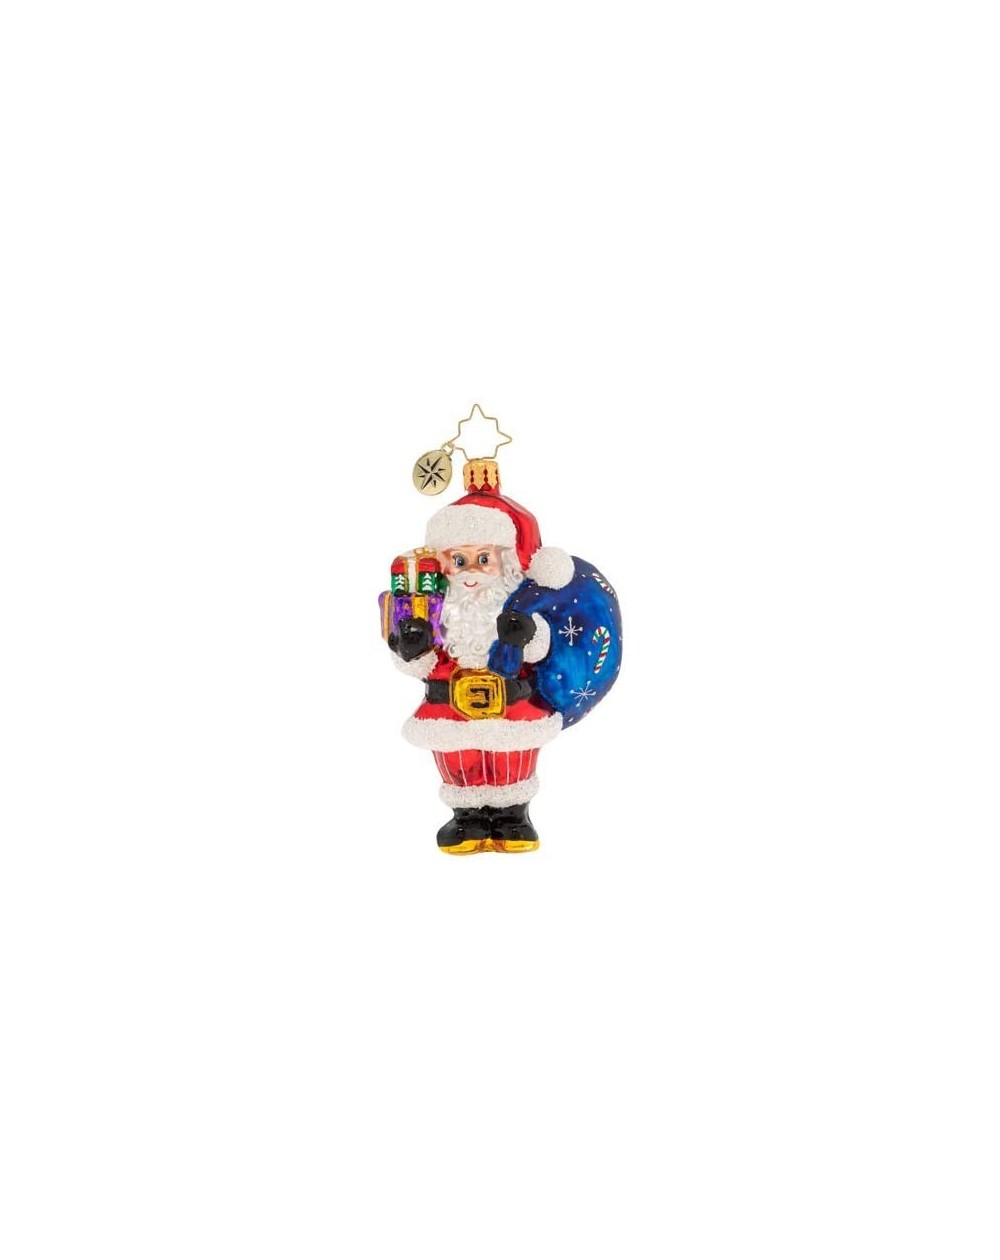 Ornaments Hand-Crafted European Glass Christmas Ornaments- Jolly Saint Nick! - Jolly Saint Nick - CR18NIDIMOZ $43.03